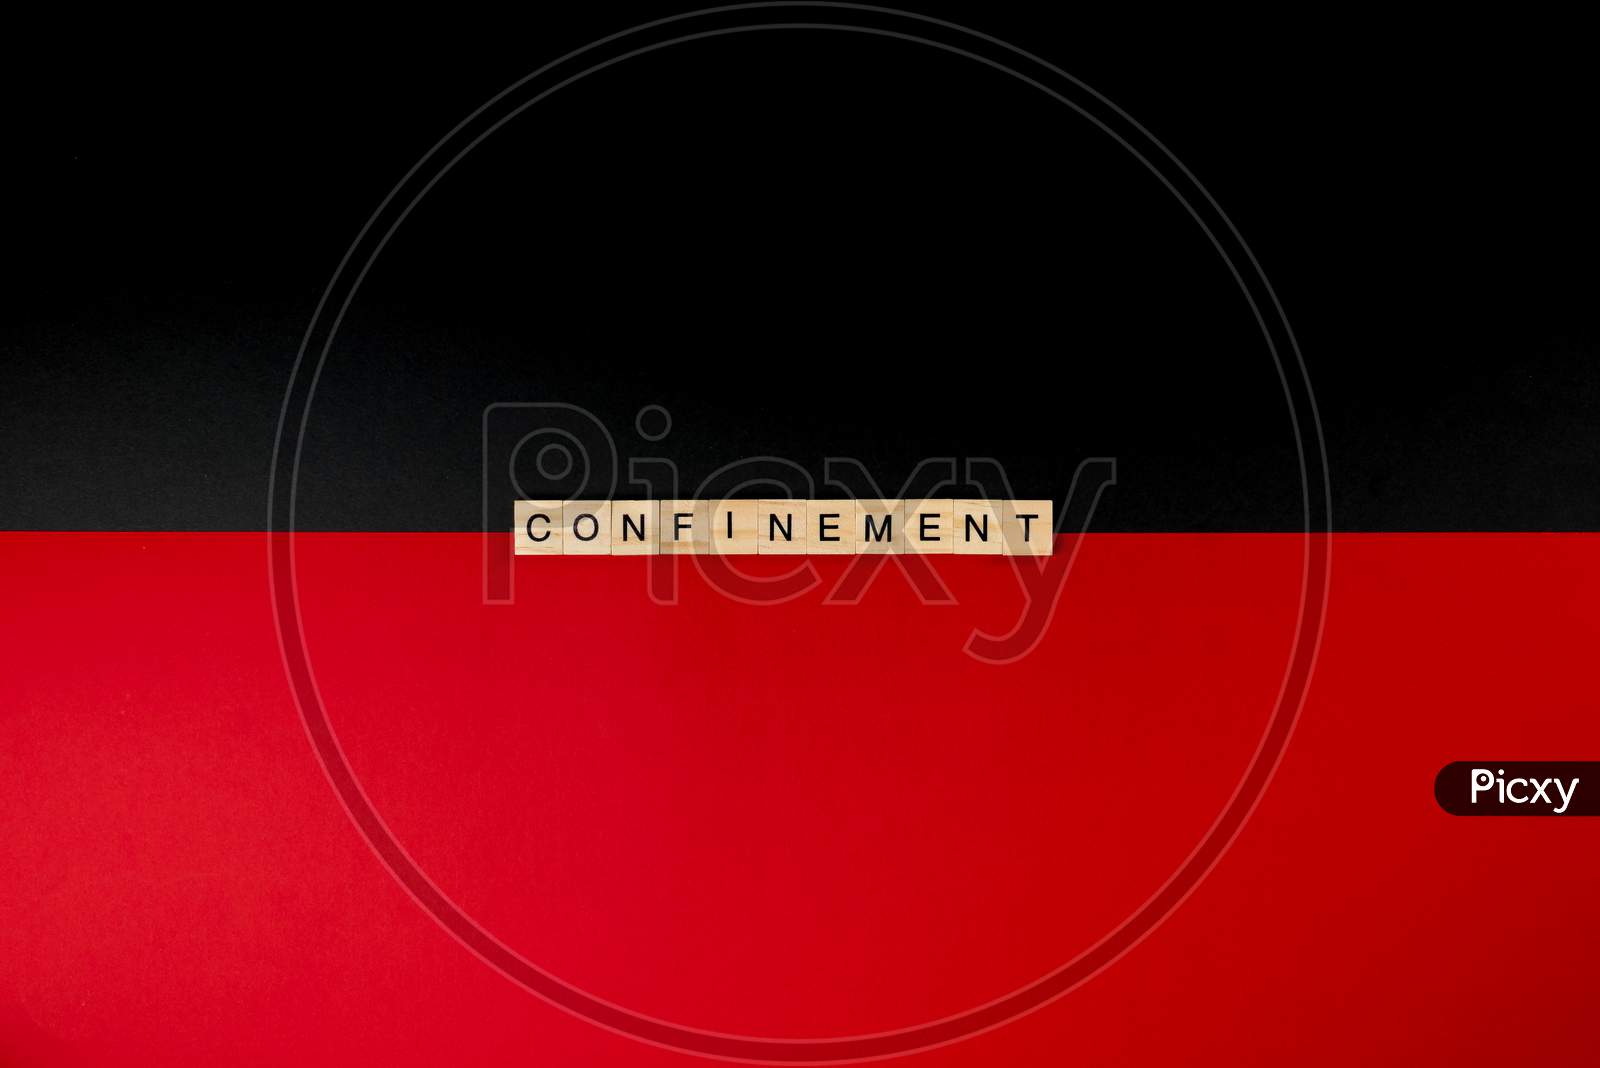 Wooden Letters On A Red And Black Background Forming The Word “Confinement”. Second Wave During Coronavirus Pandemic Concept.